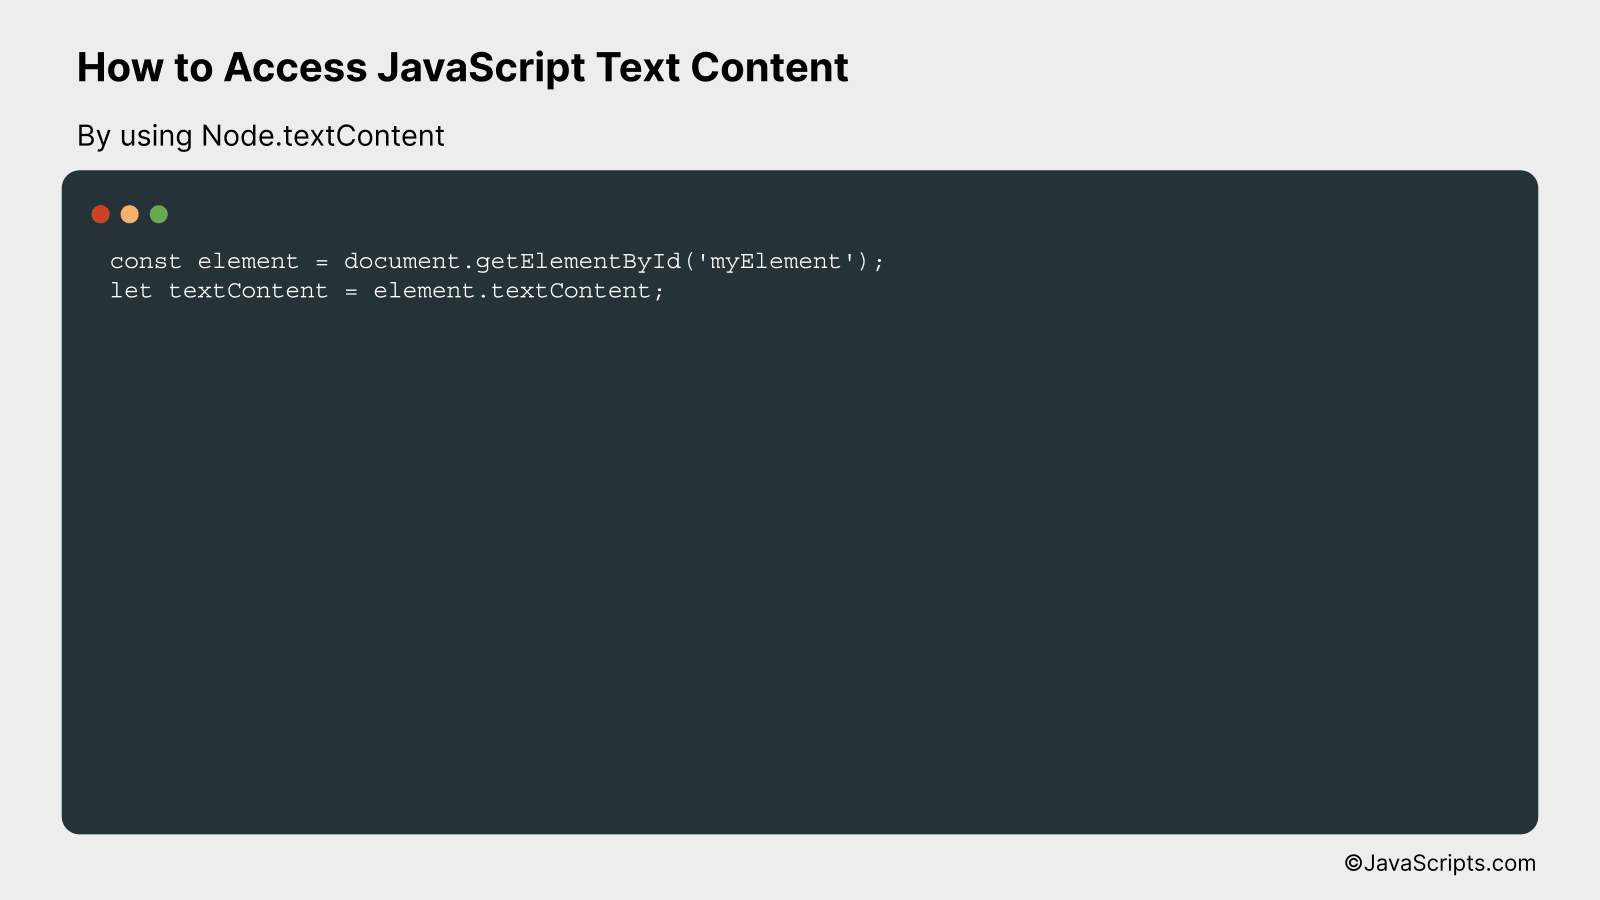 By using Node.textContent